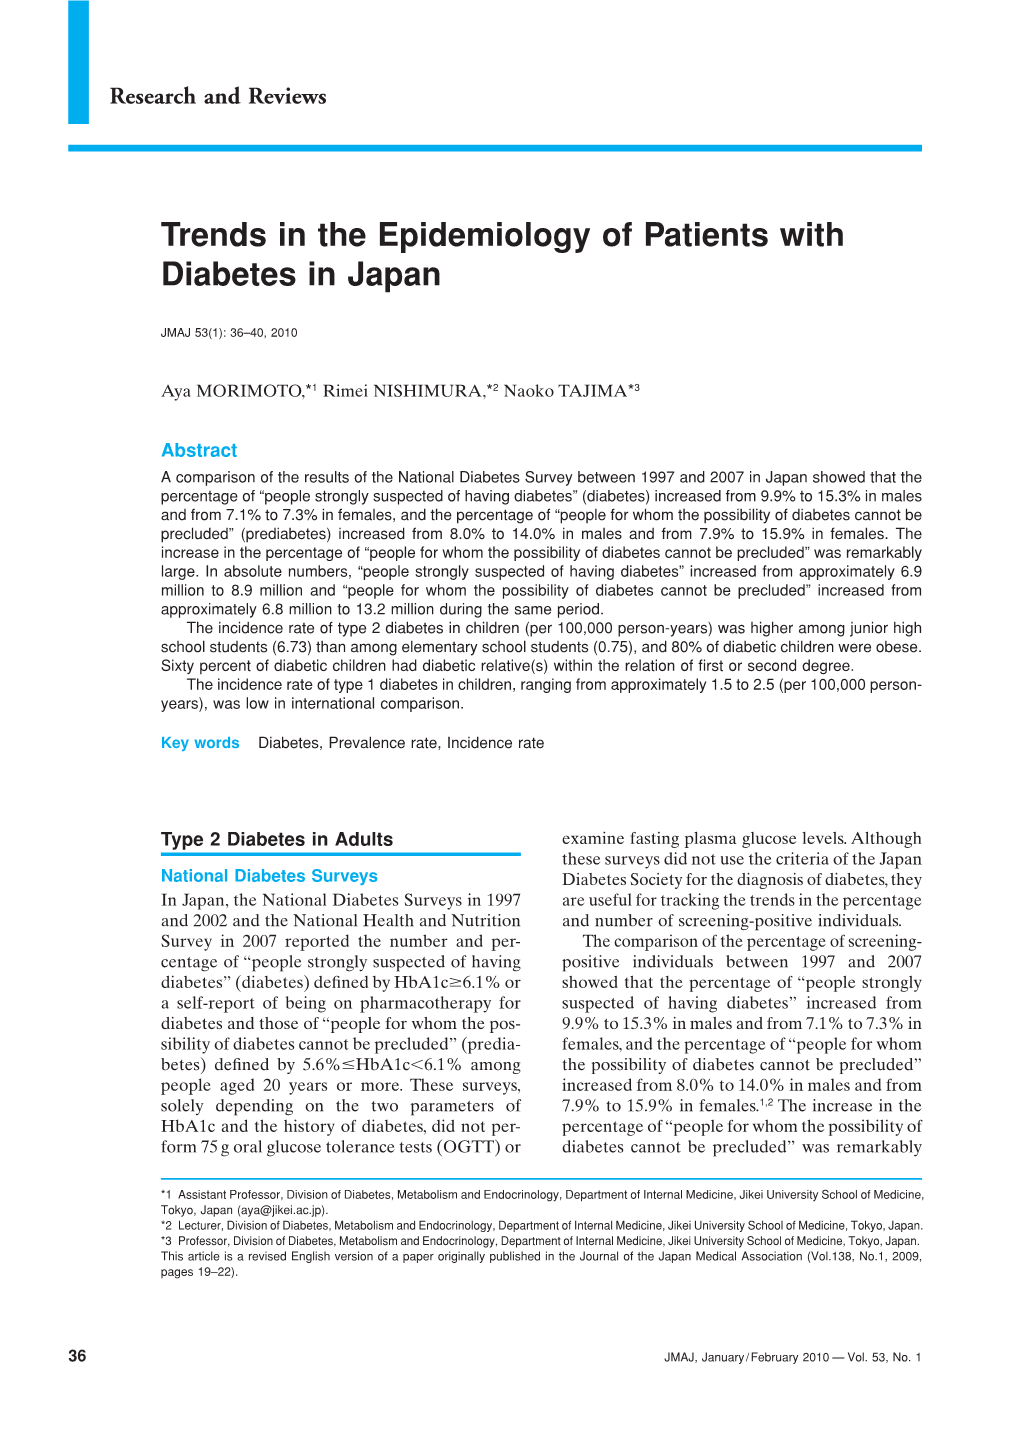 Trends in the Epidemiology of Patients with Diabetes in Japan